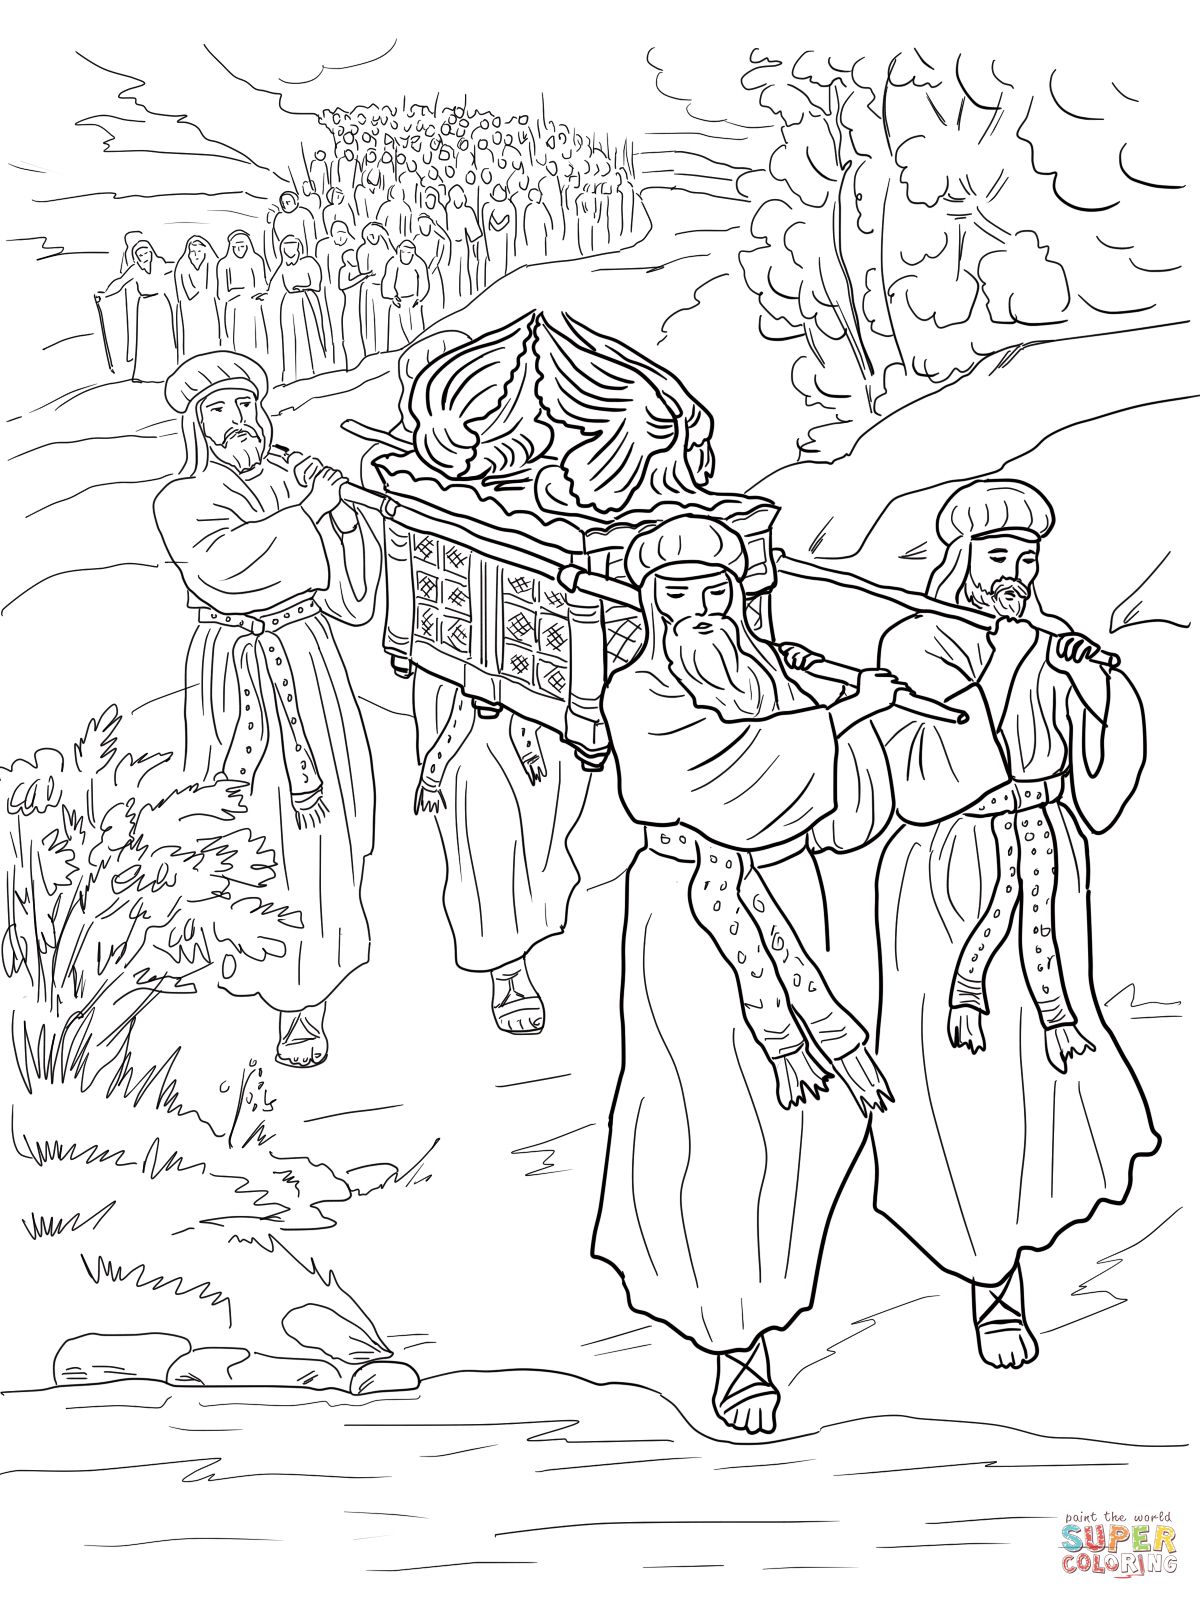 Joshua and the Fall of Jericho coloring page | Free Printable ...